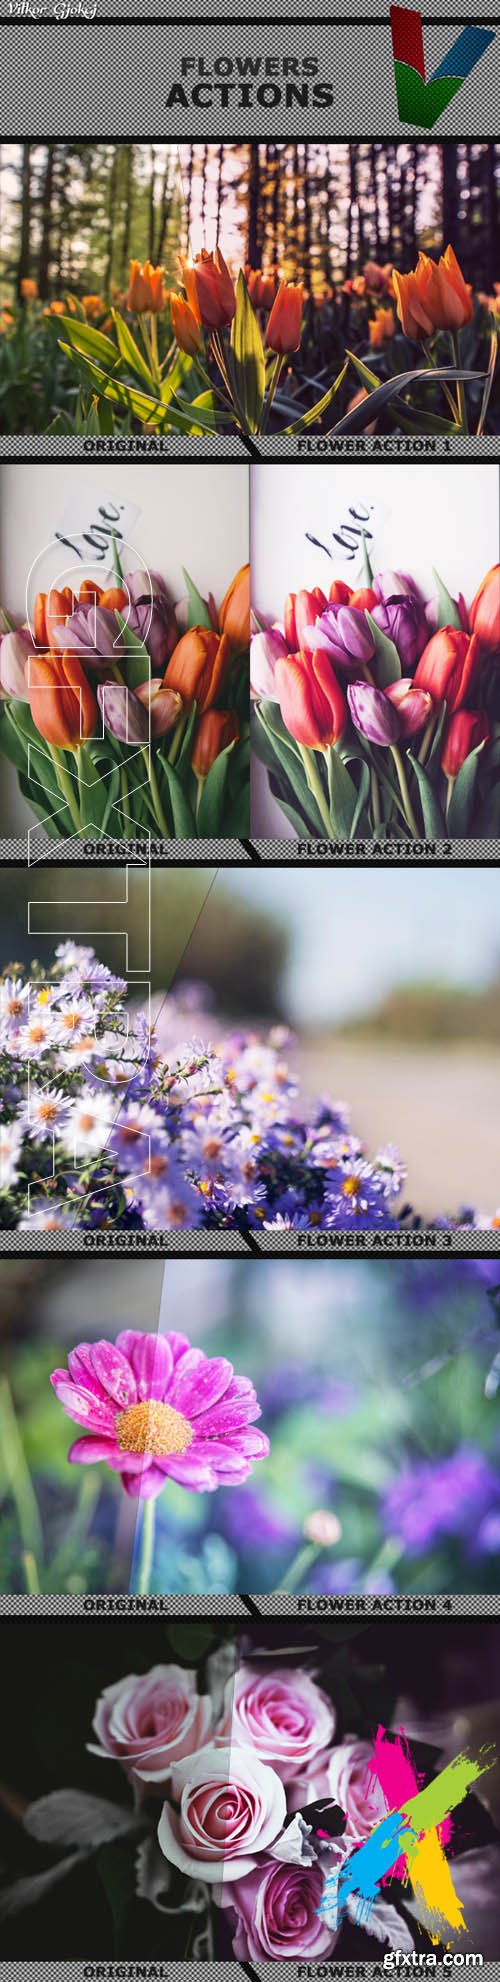 Graphicriver - Flowers Photoshop Actions 1 20217964